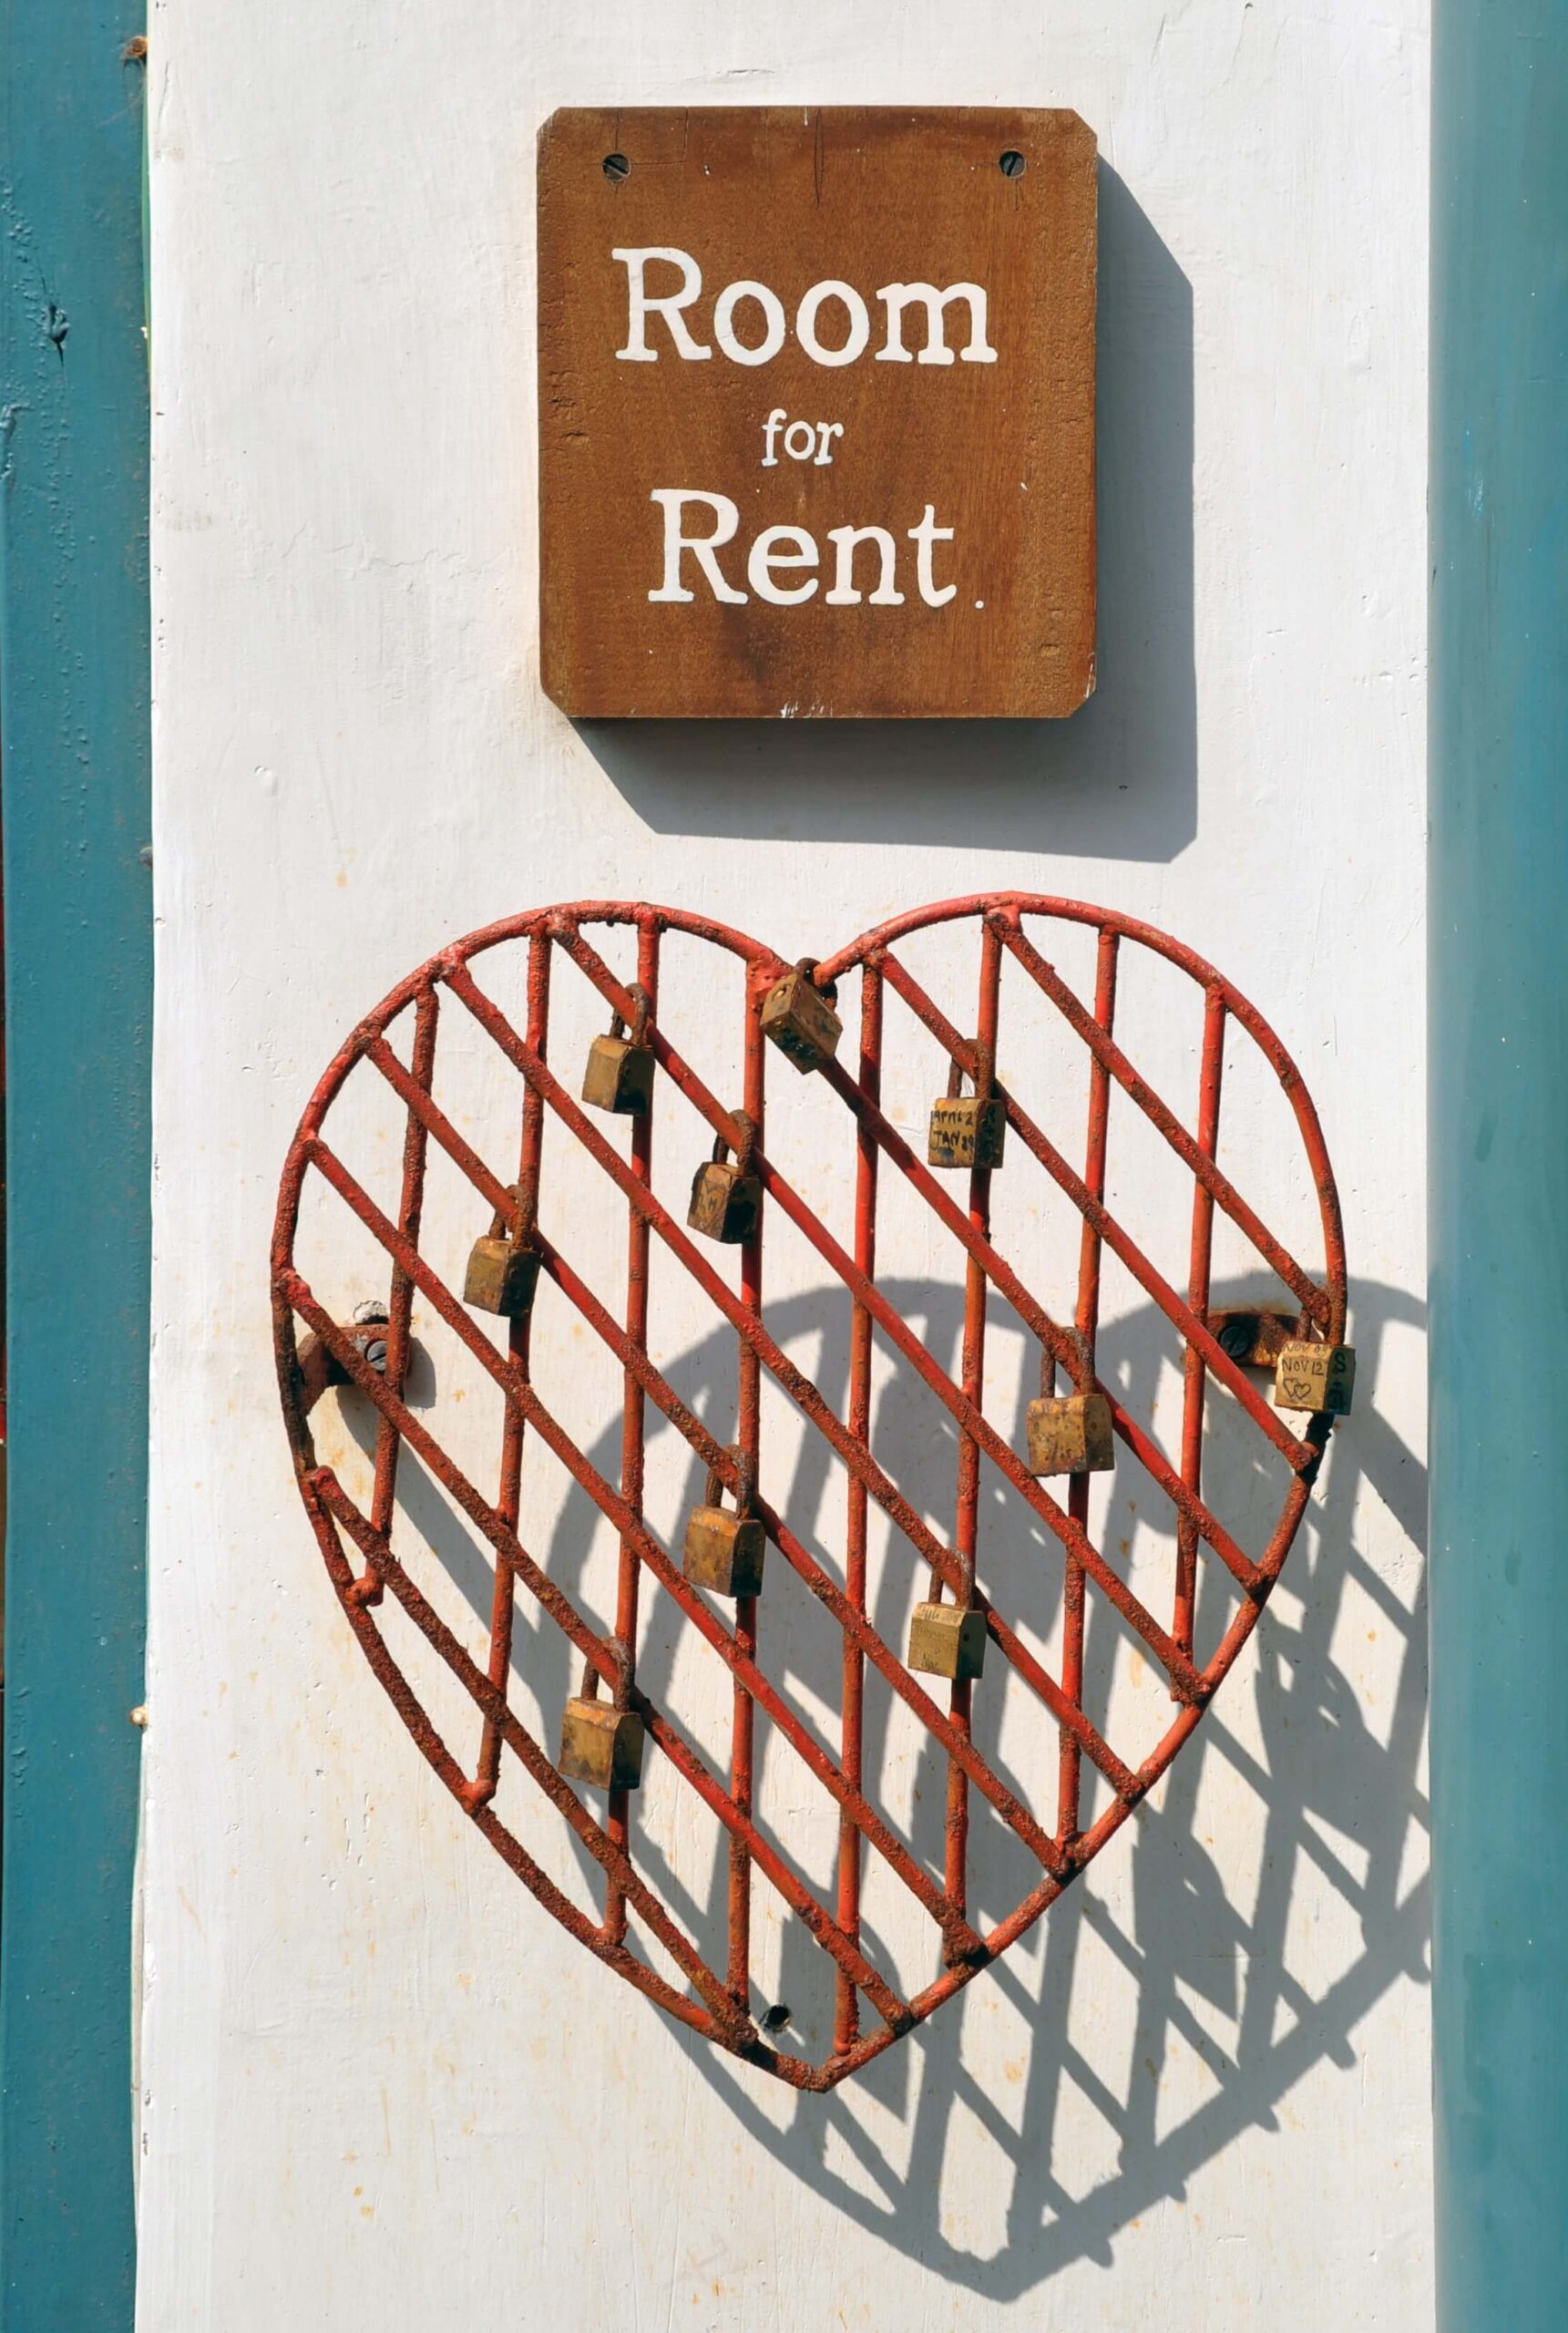 A welcoming sign saying " Room to rent". A photo used for this article about Landlors and rental properties.